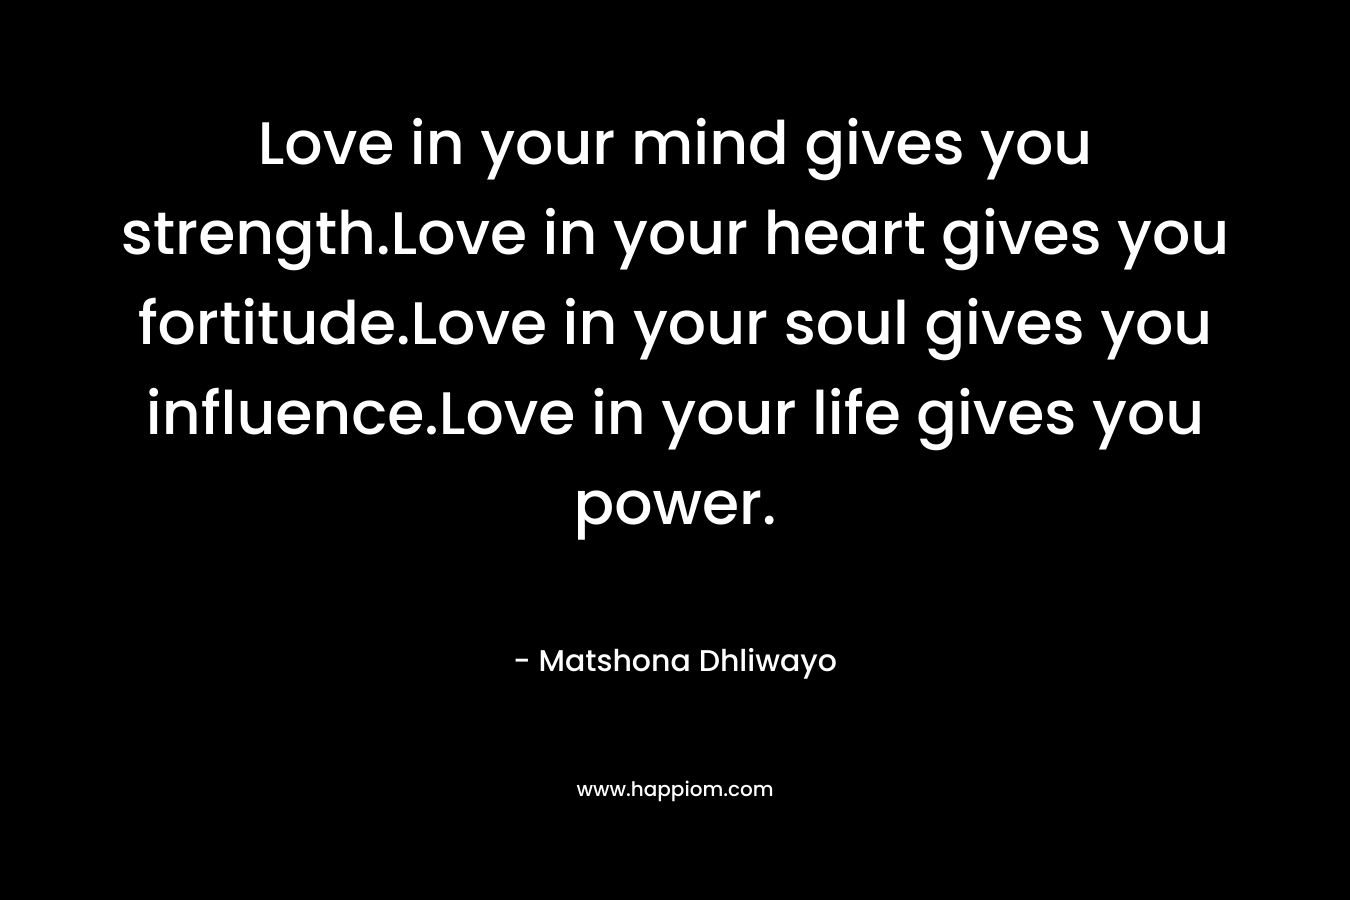 Love in your mind gives you strength.Love in your heart gives you fortitude.Love in your soul gives you influence.Love in your life gives you power. – Matshona Dhliwayo